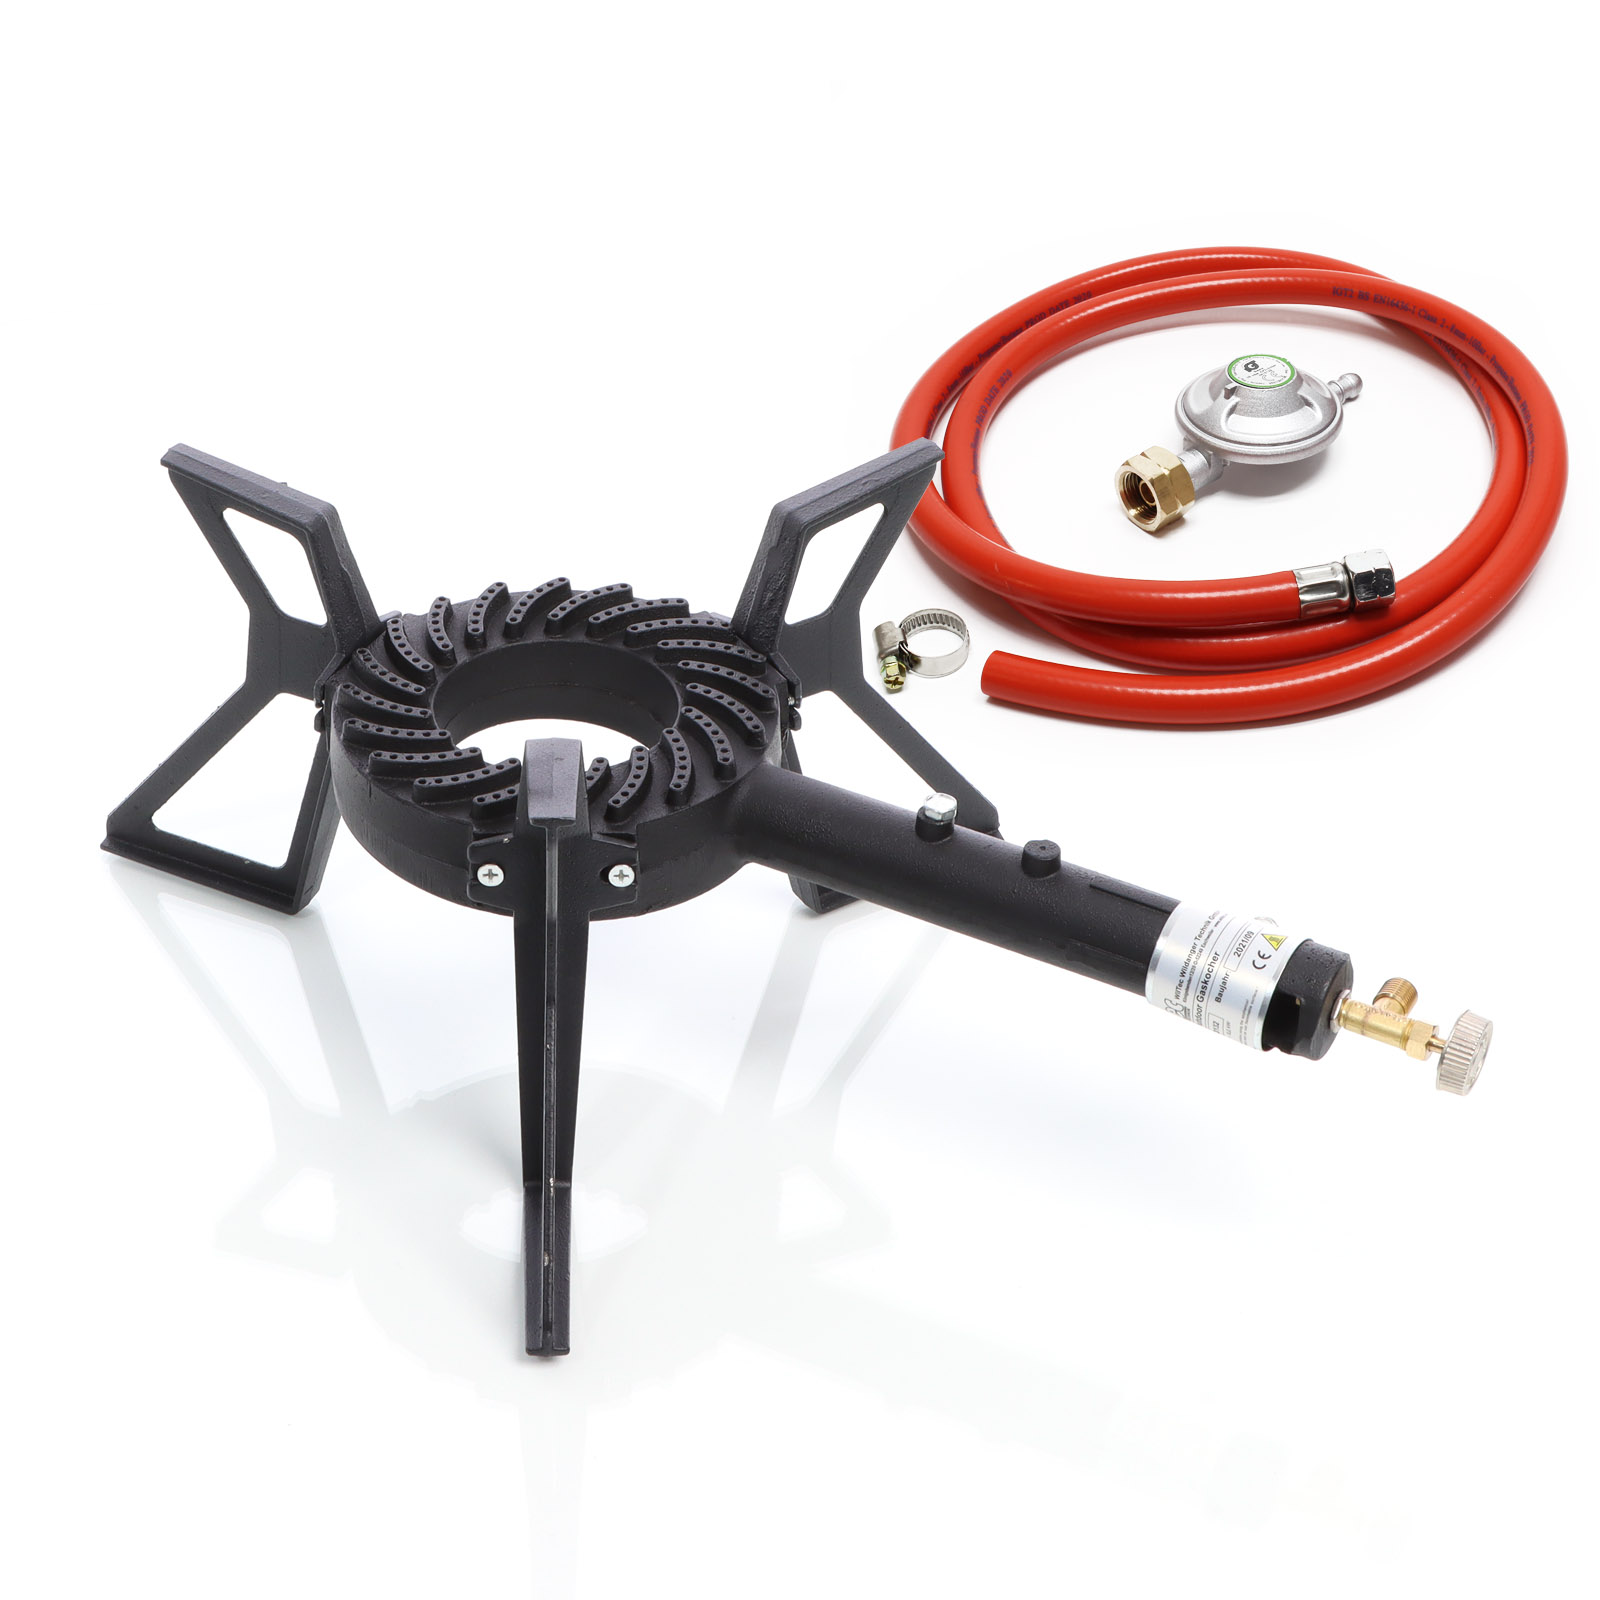 Outdoor Camping Cooker Leisure Time Stove Gas with Hose and Regulator